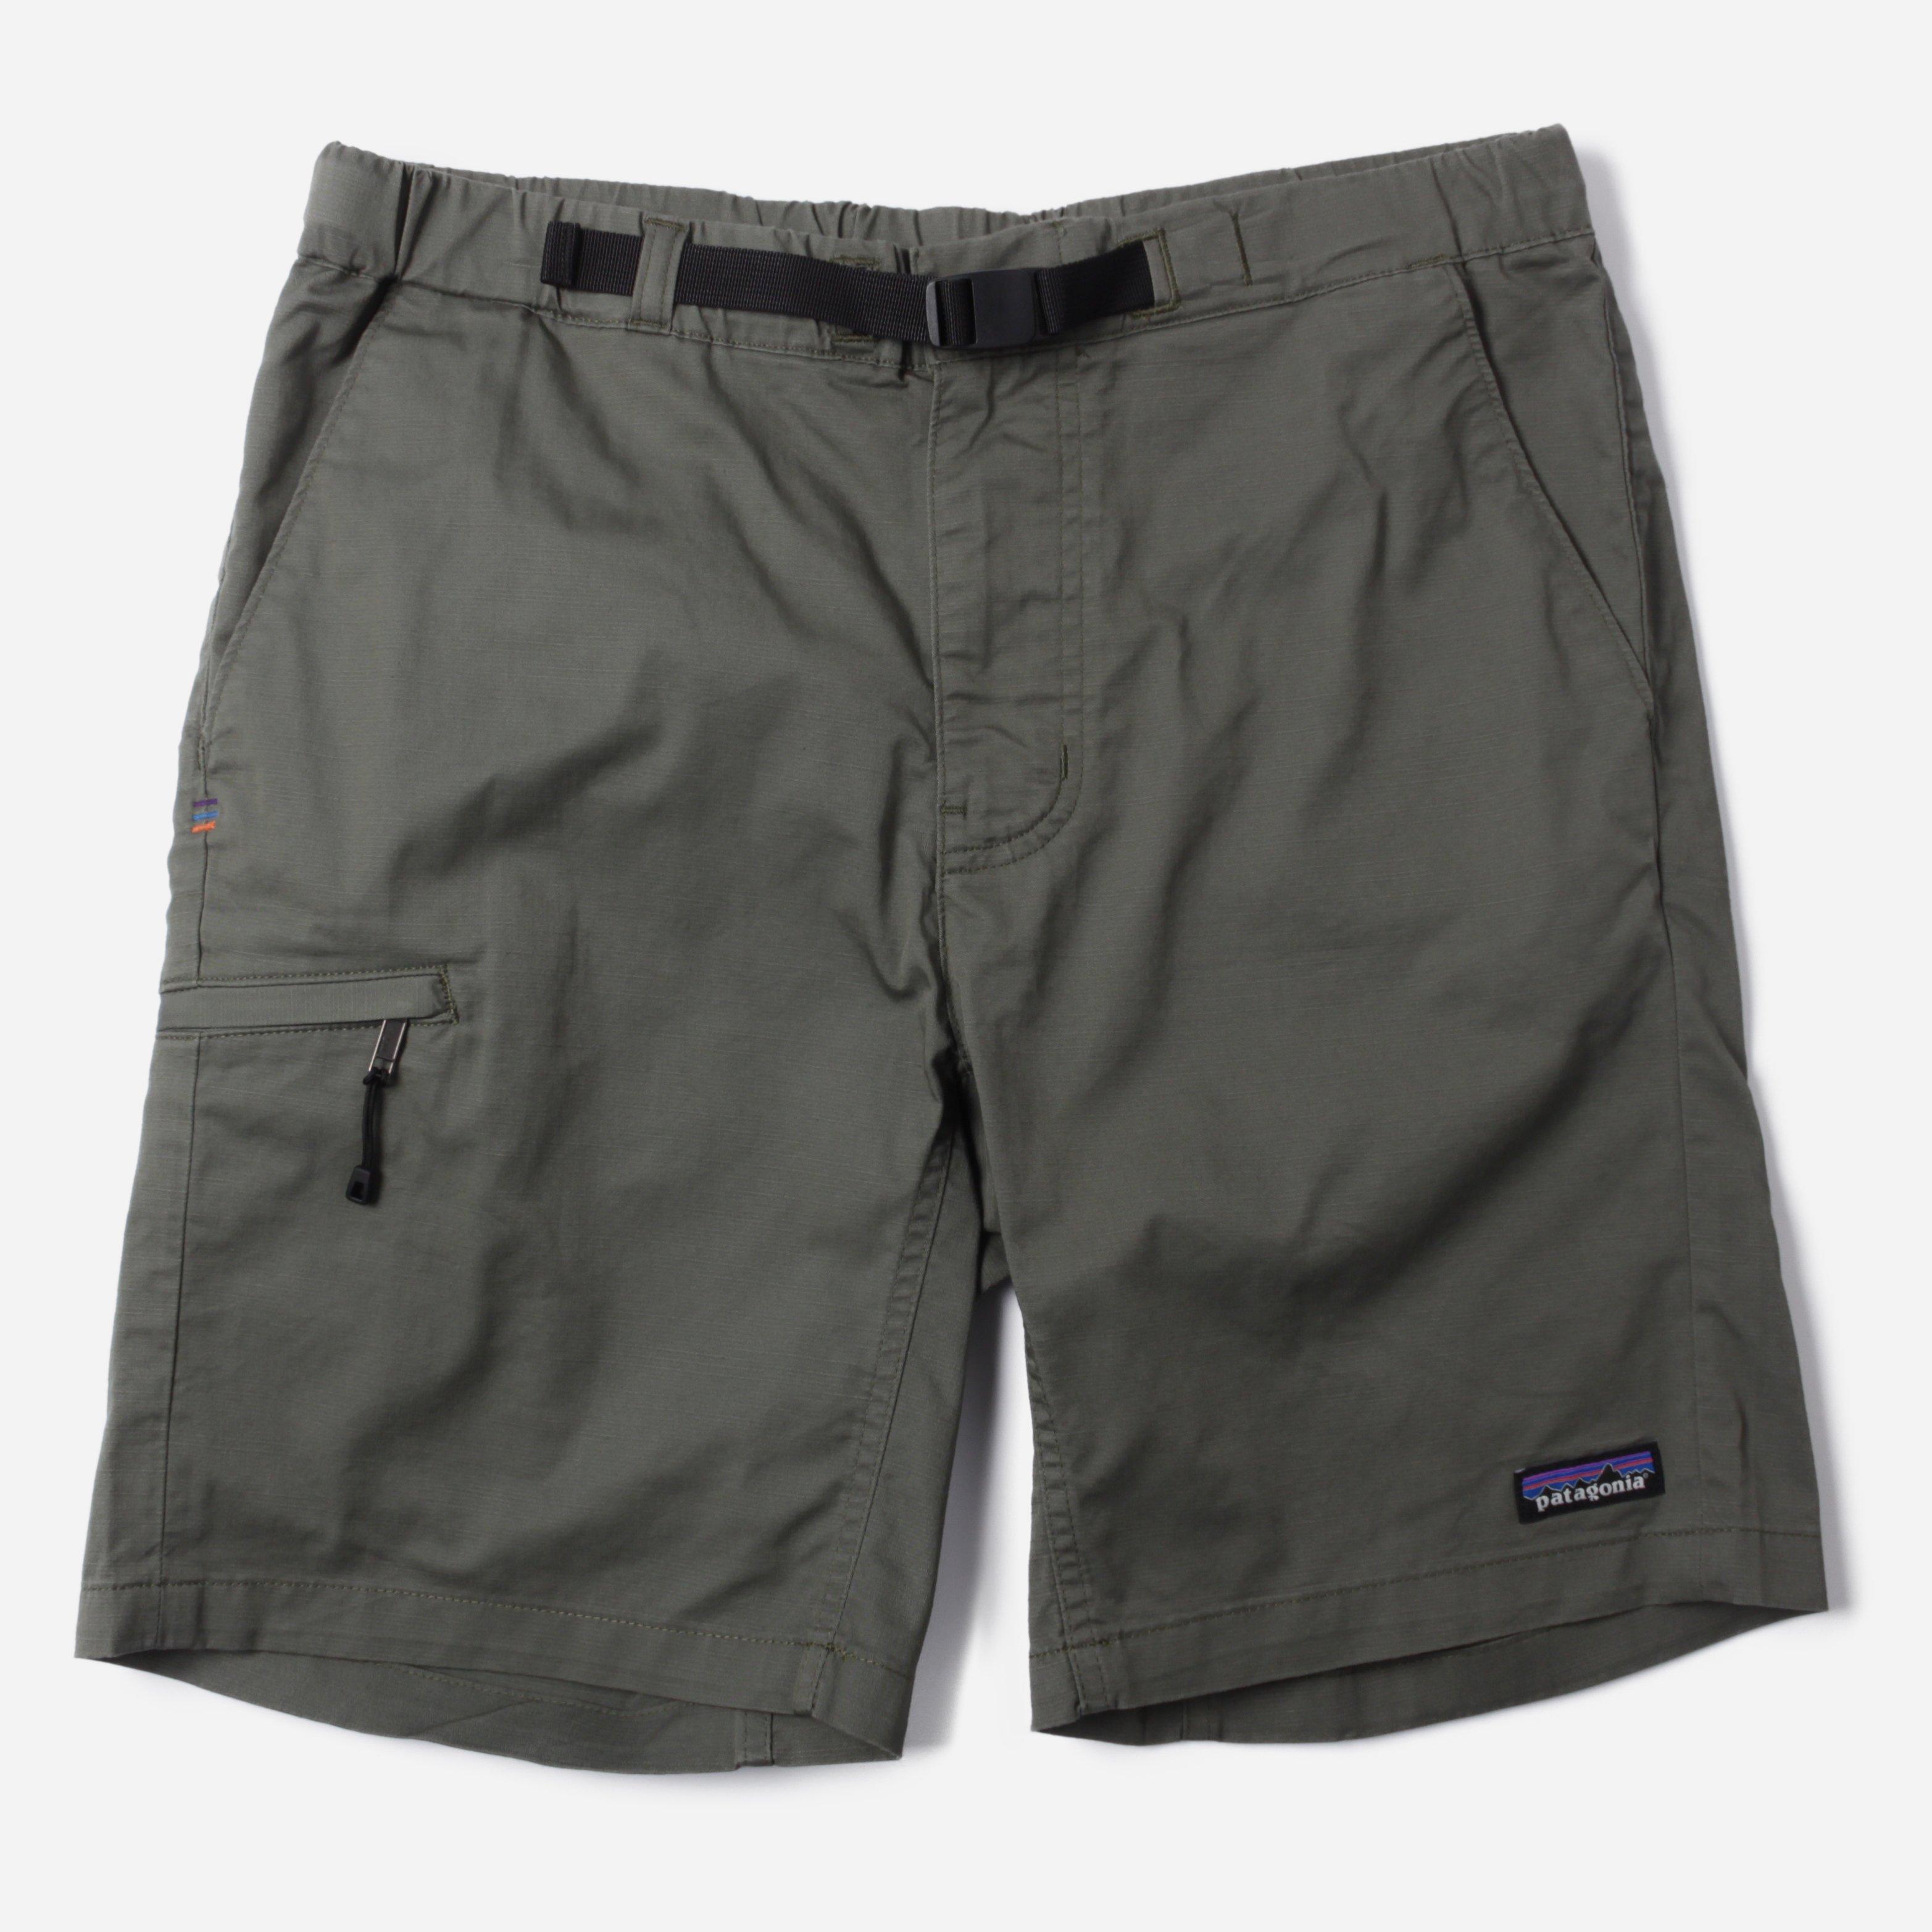 Patagonia Performance Gi Iv Shorts in Gray for Men - Lyst